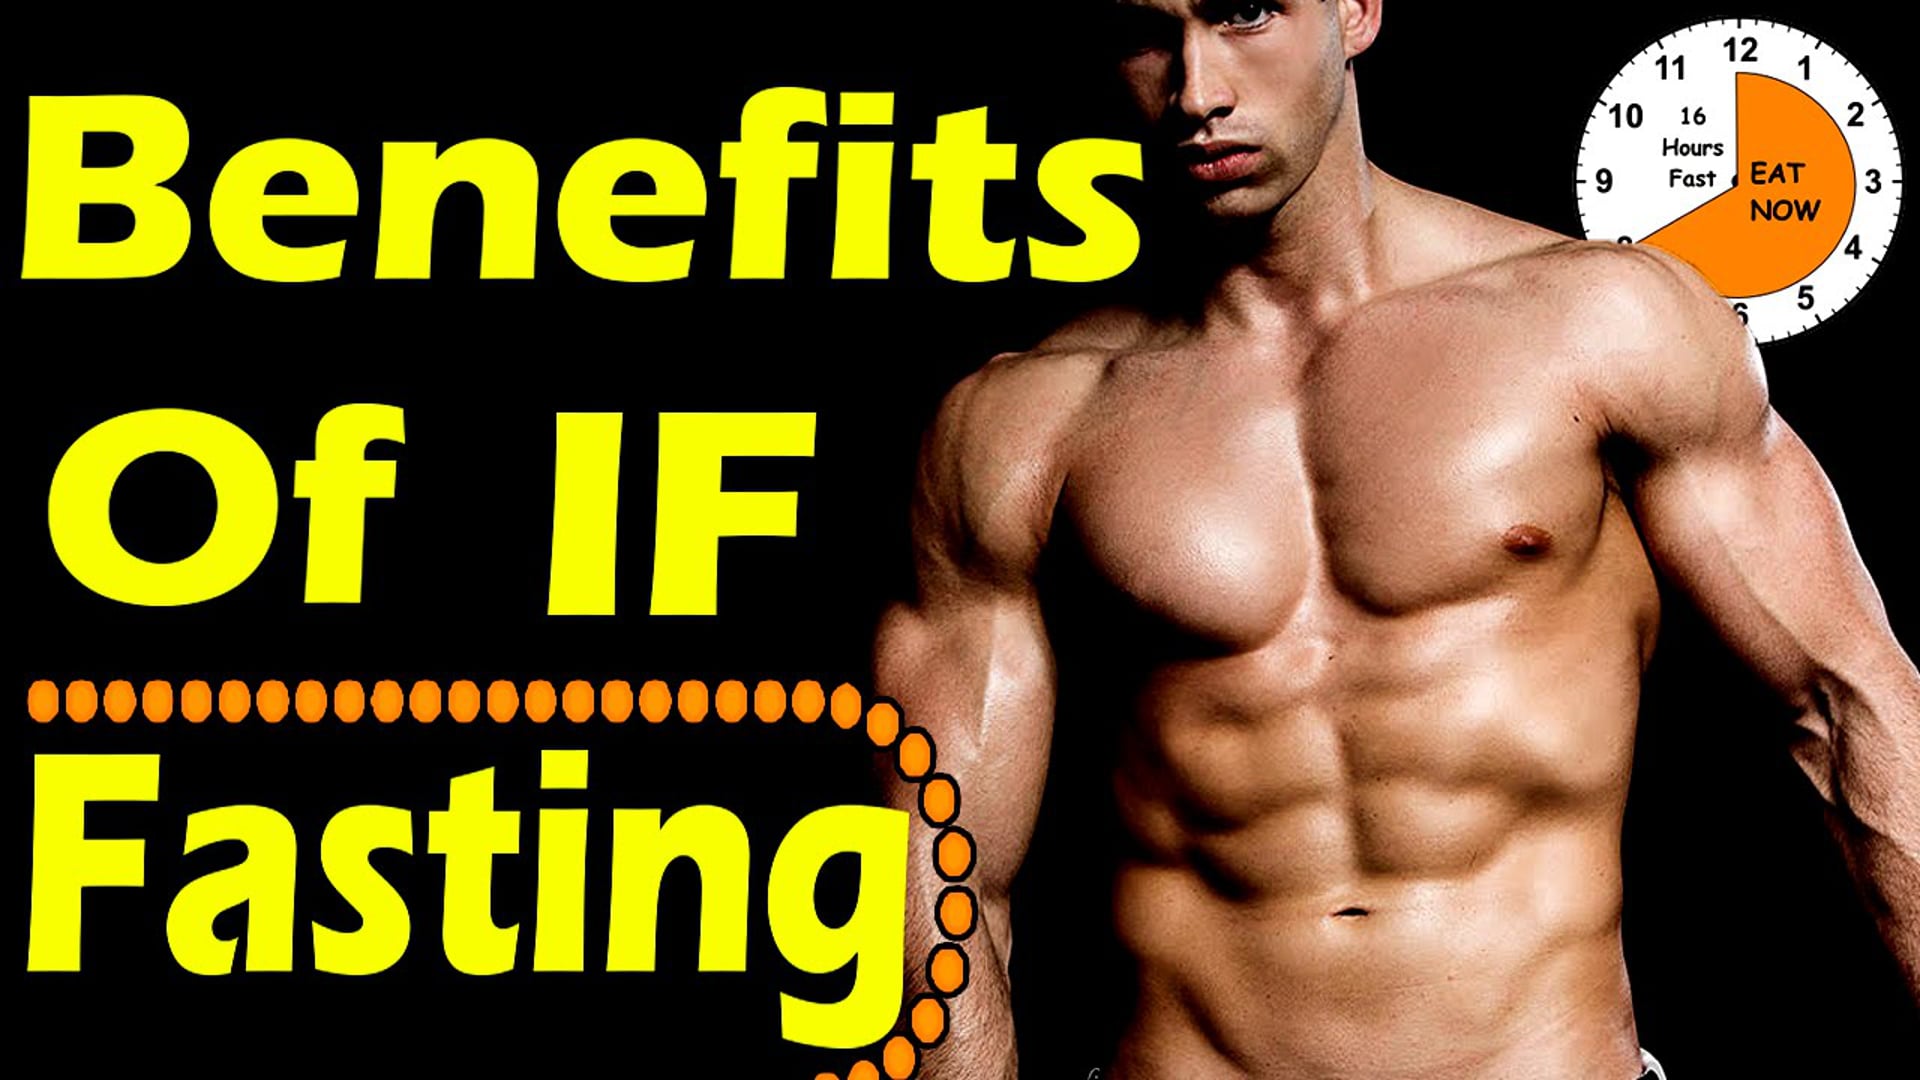 Top 3 Benefits of INTERMITTENT FASTING for WEIGHT LOSS u0026 Burning Fat